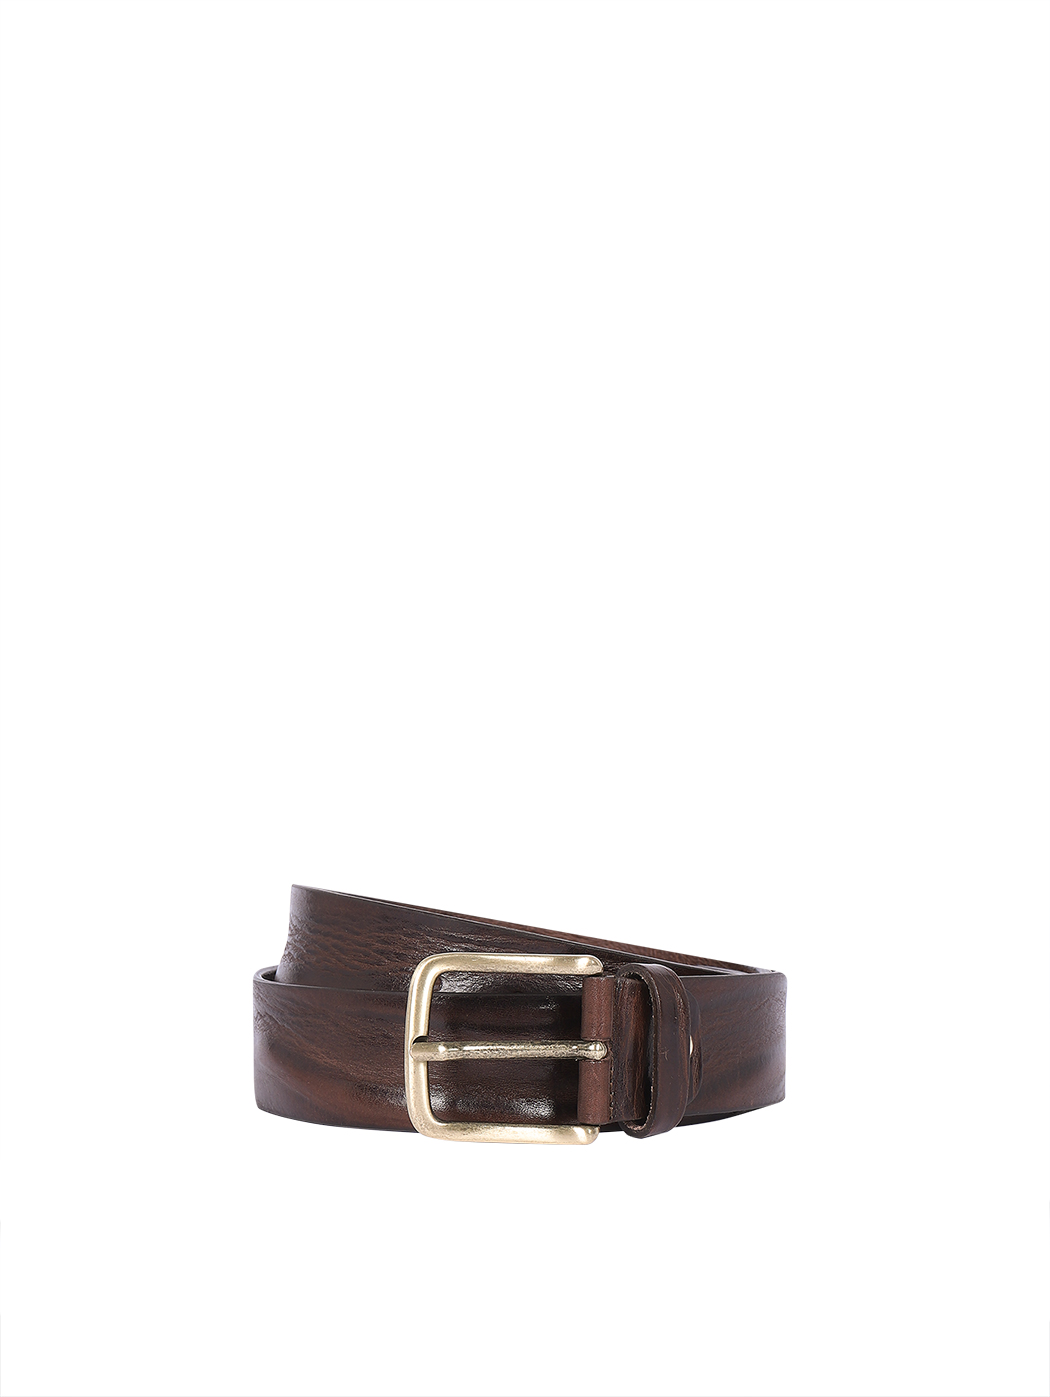 Classic Italian Belt For Man With Stitching Dark Brown